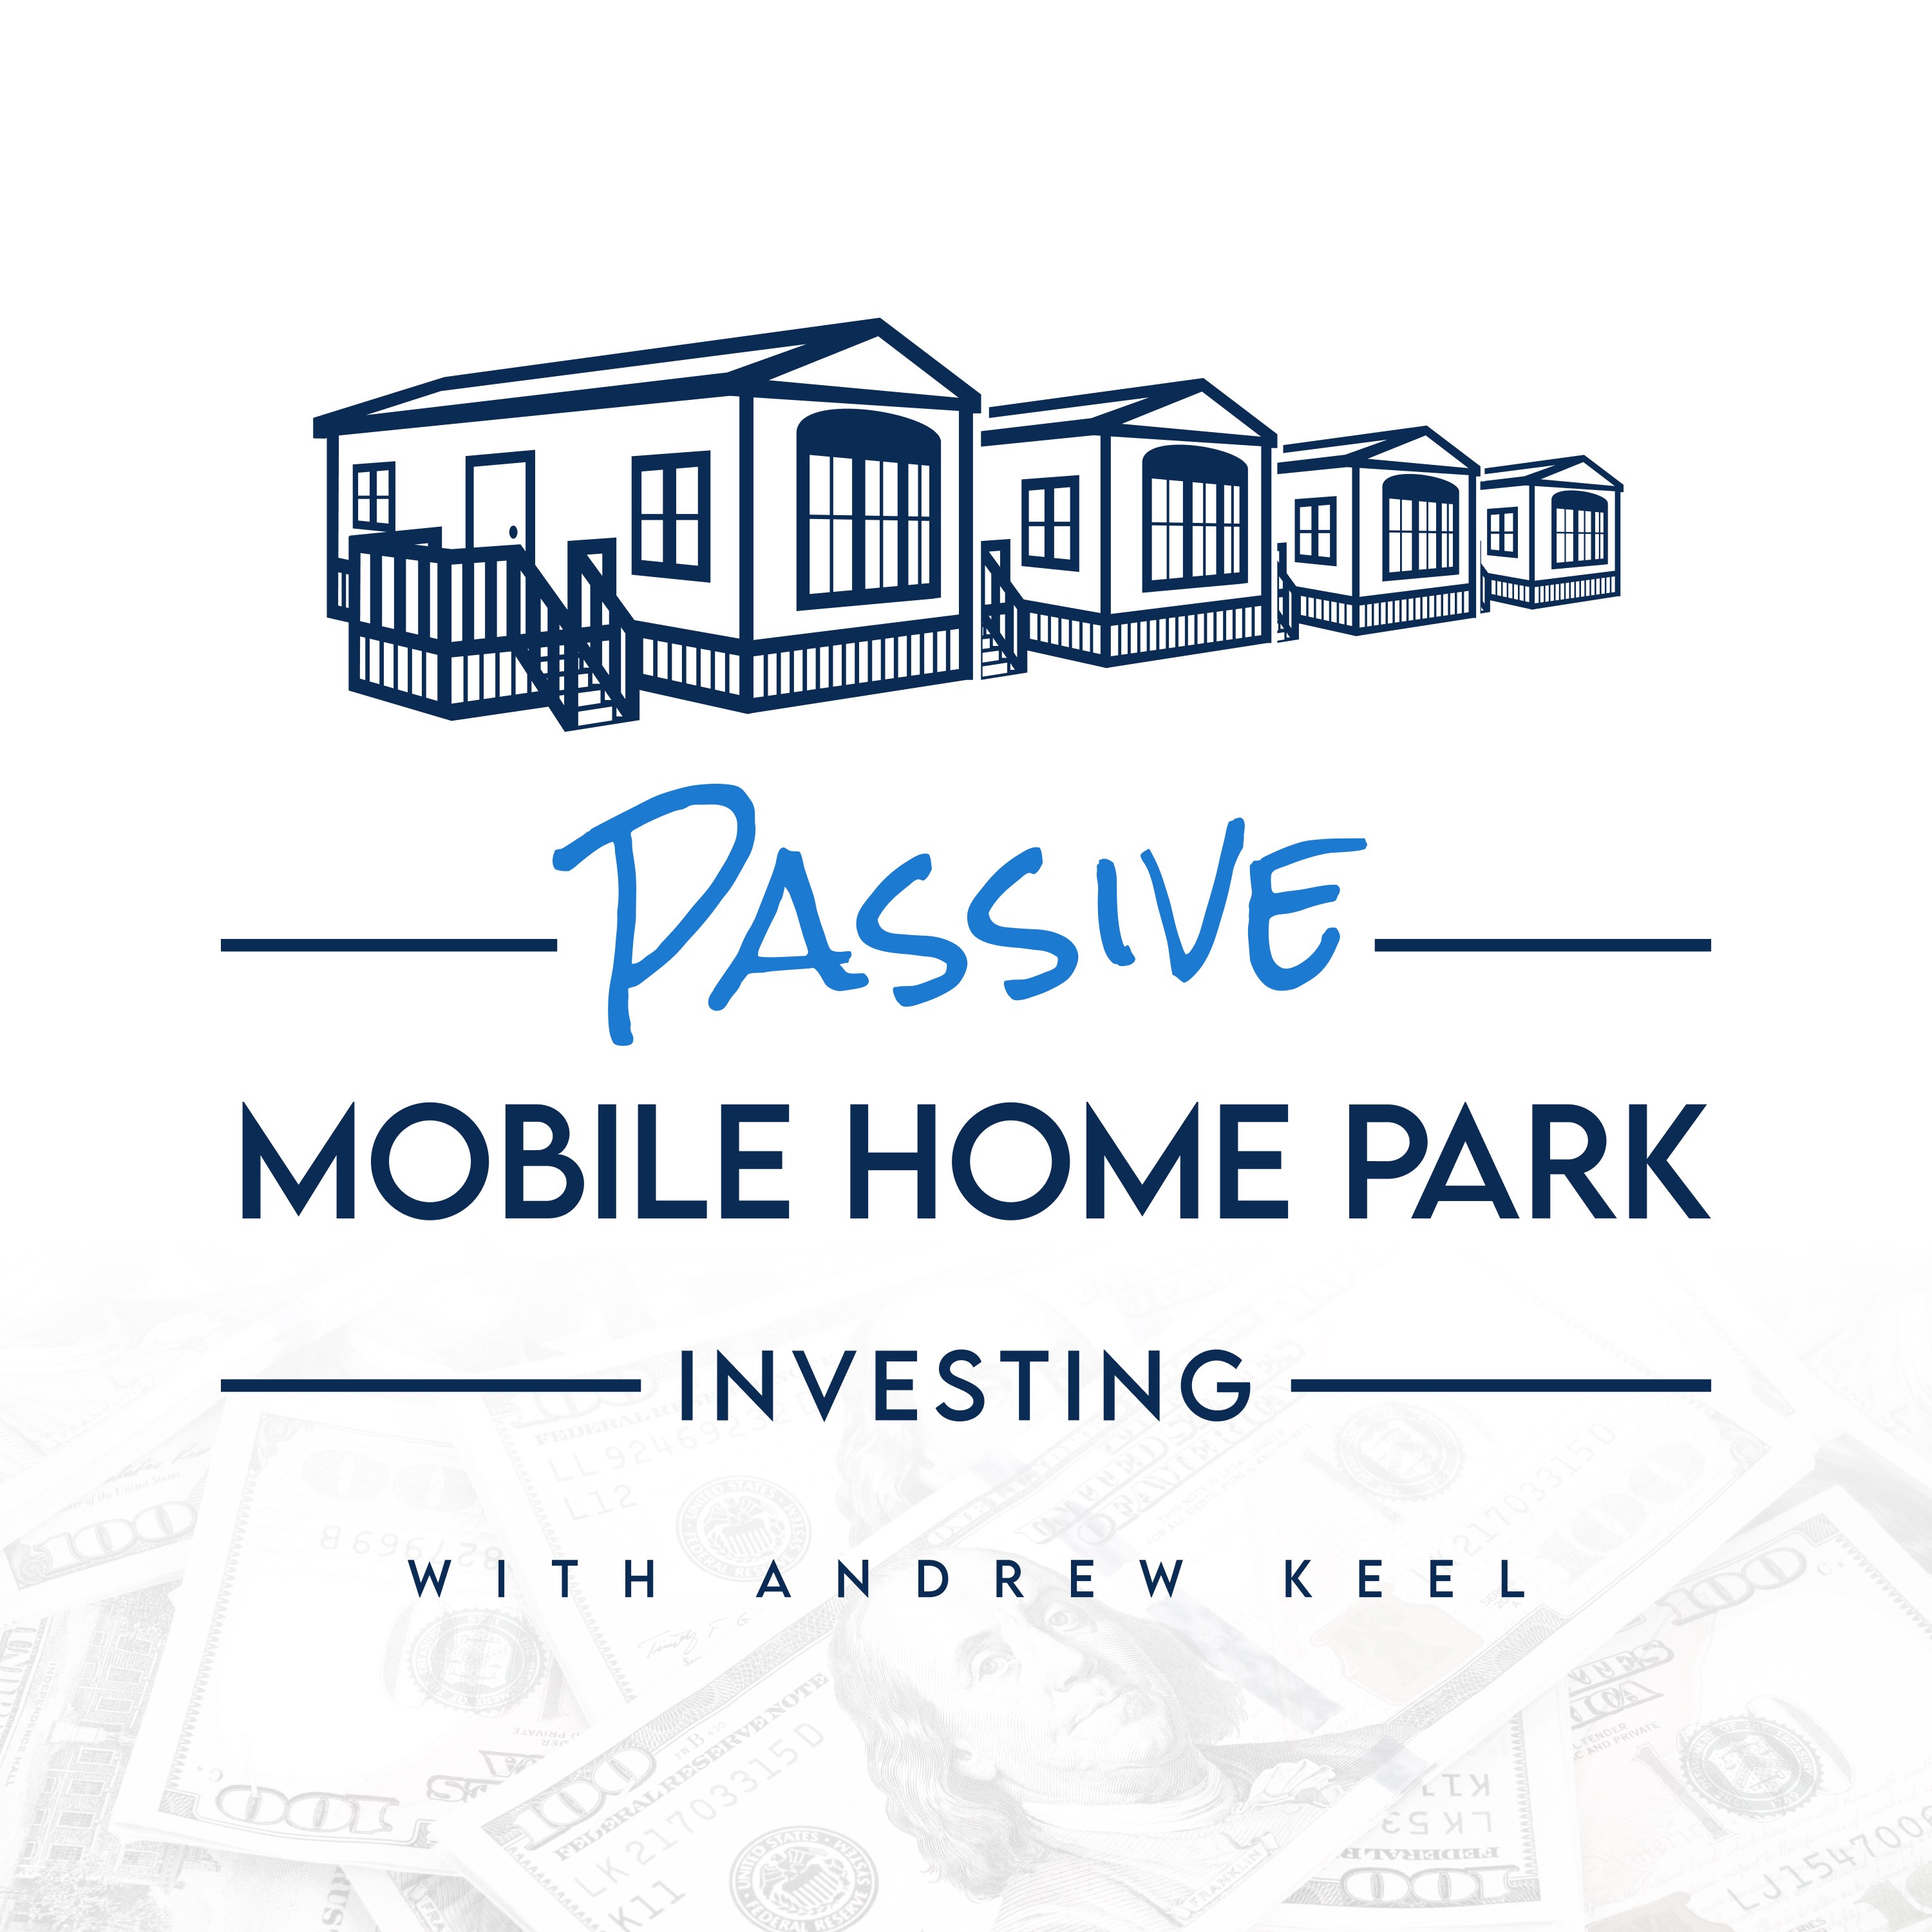 Interview with Mobile Home Park Appraiser Erik Hanson from Colliers Valuation & Advisory Services